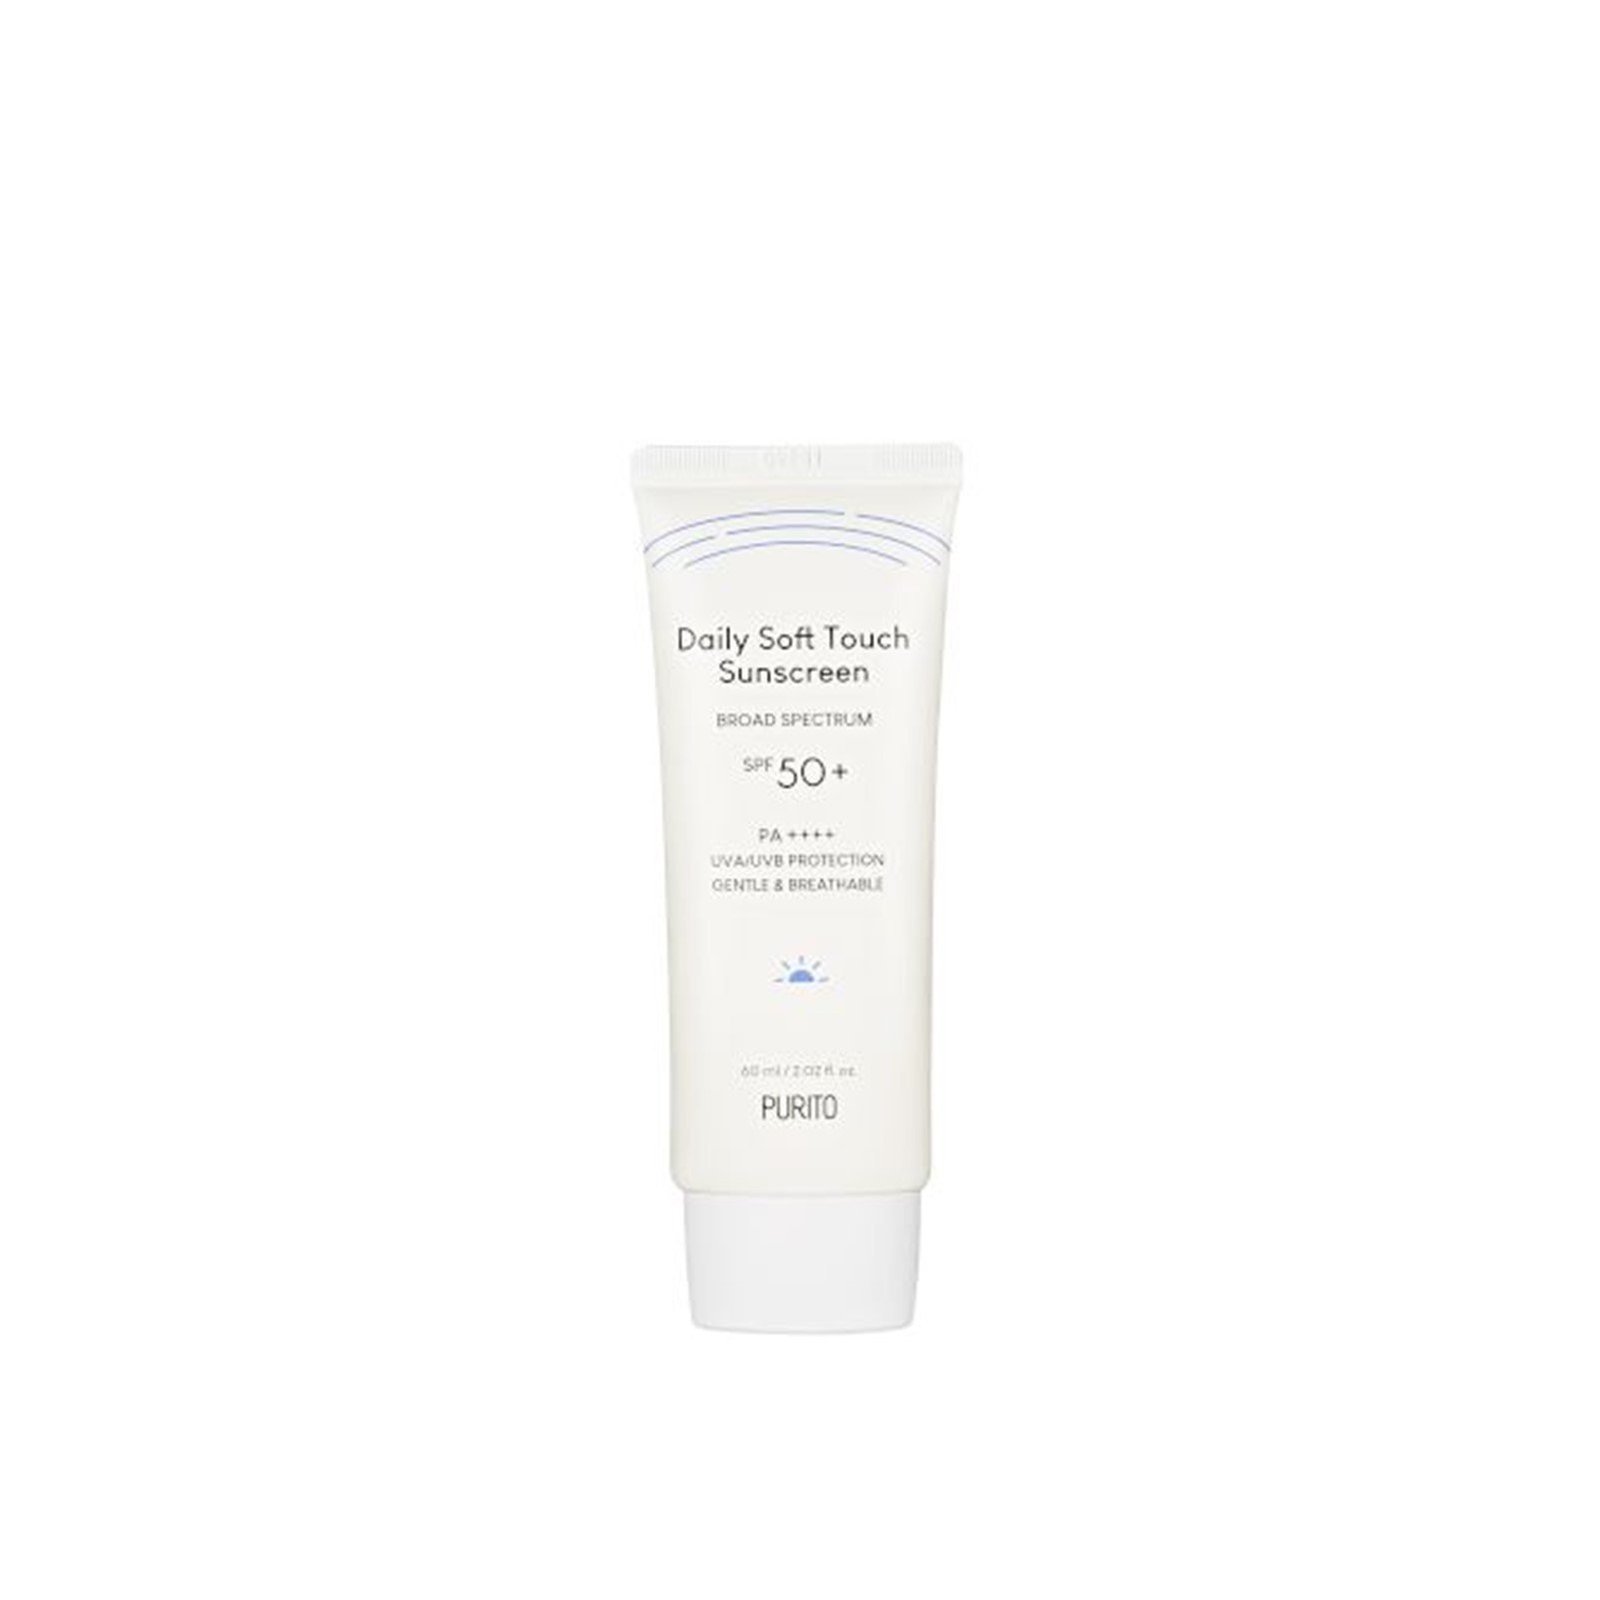 PURITO Daily Soft Touch Sunscreen SPF50+ 60ml